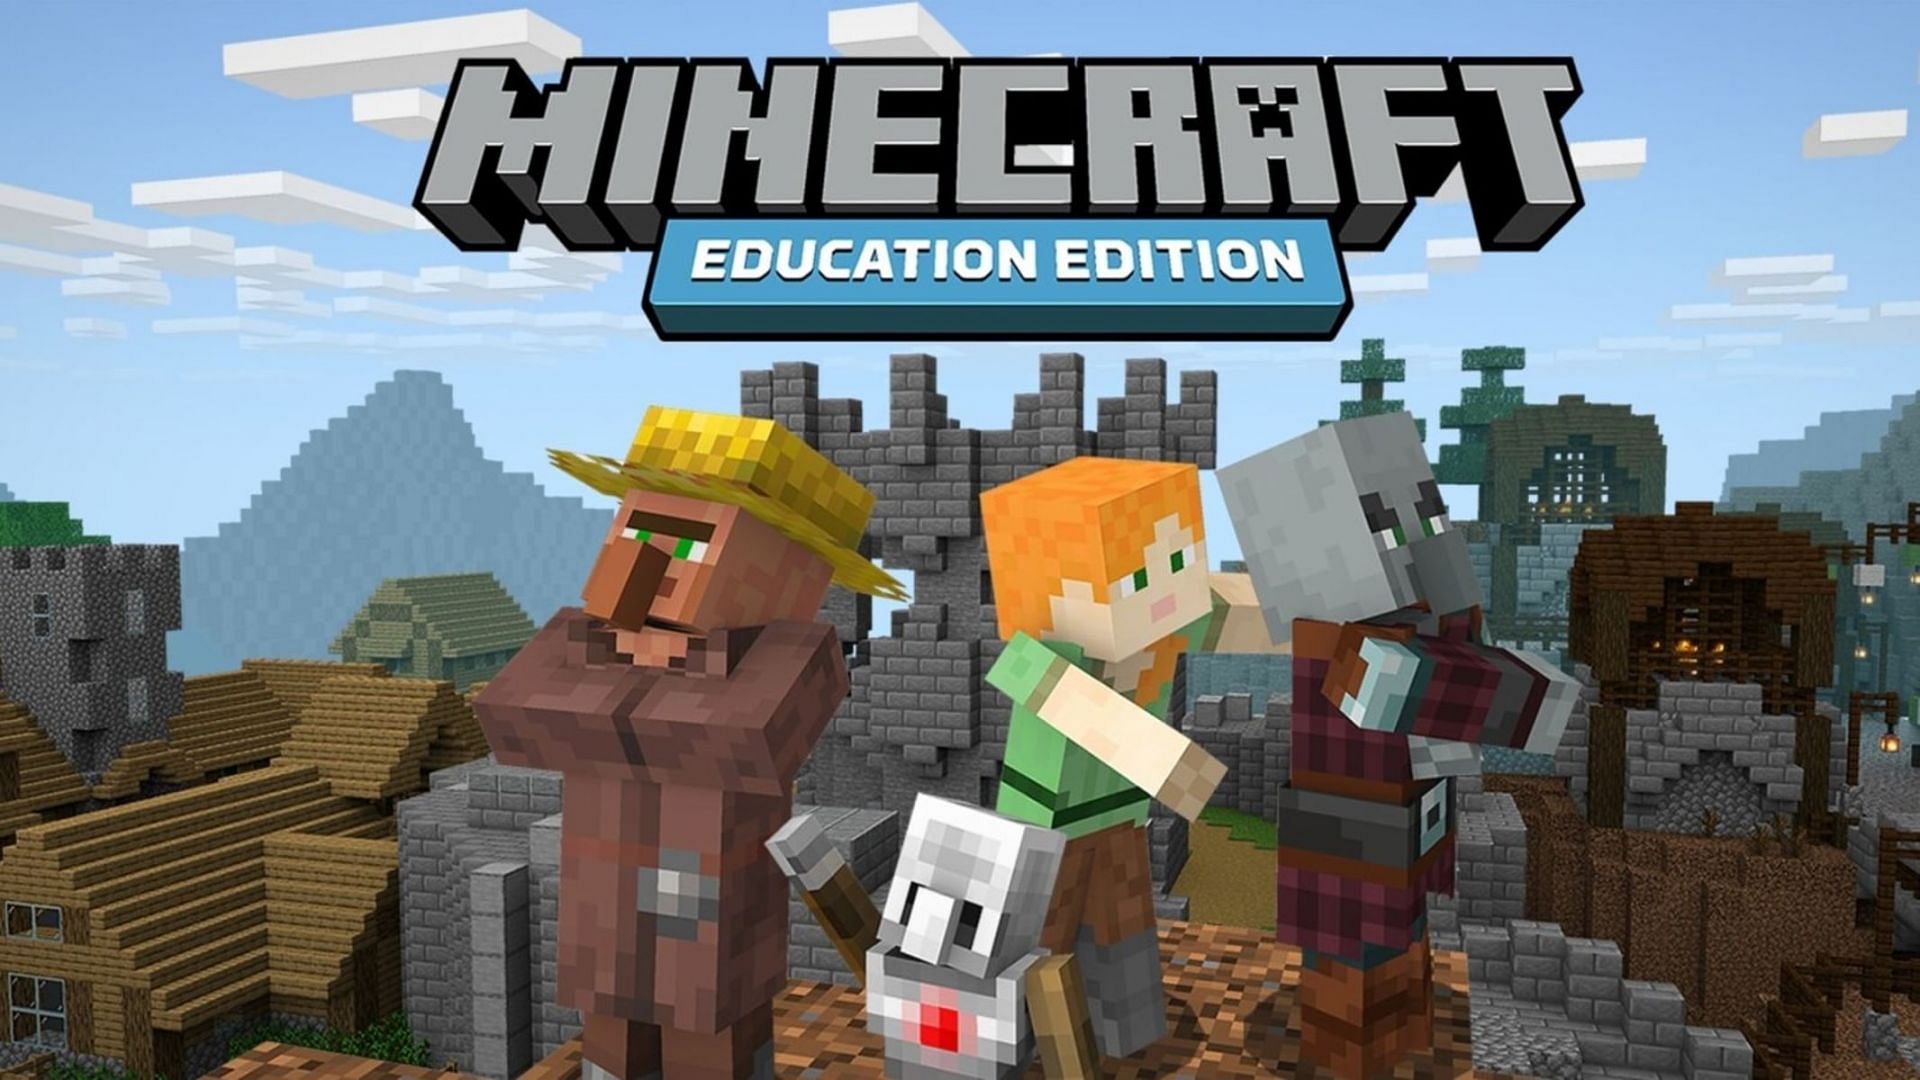 Minecraft: Education Edition brings educators and students together in an entirely new way (Image via Mojang)